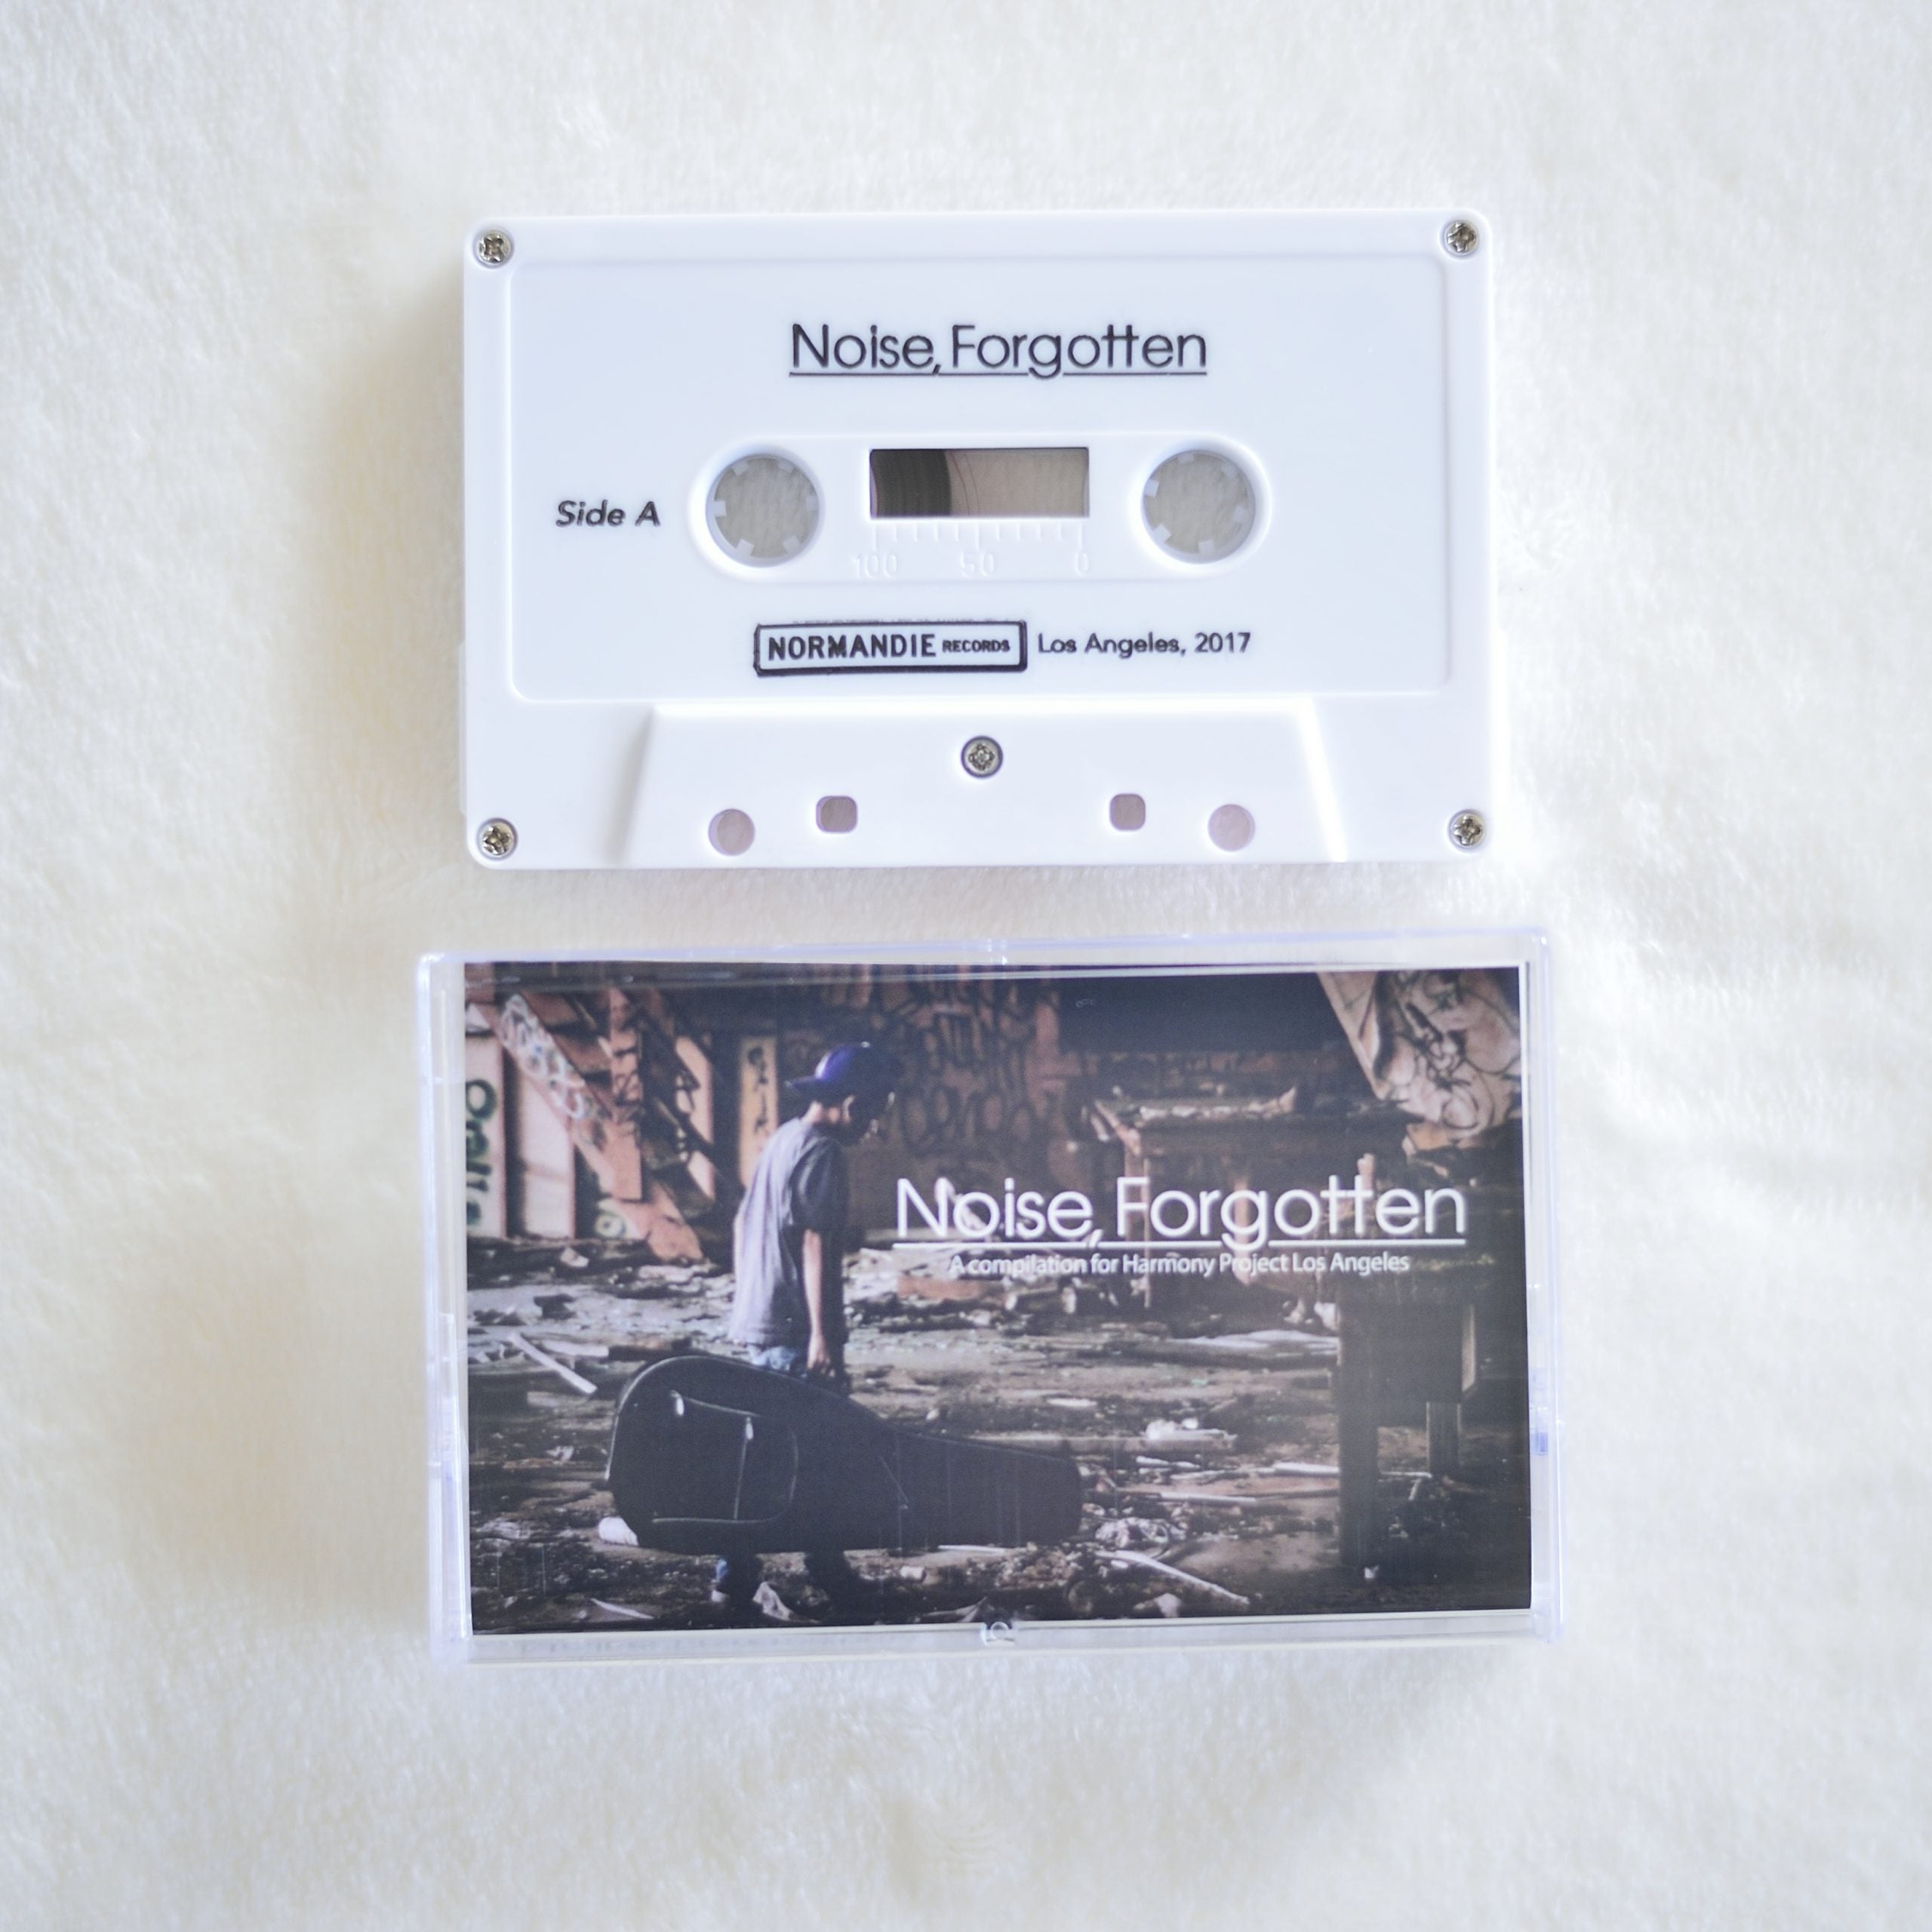 Noise Forgotten: A Compilation for Harmony Project LA